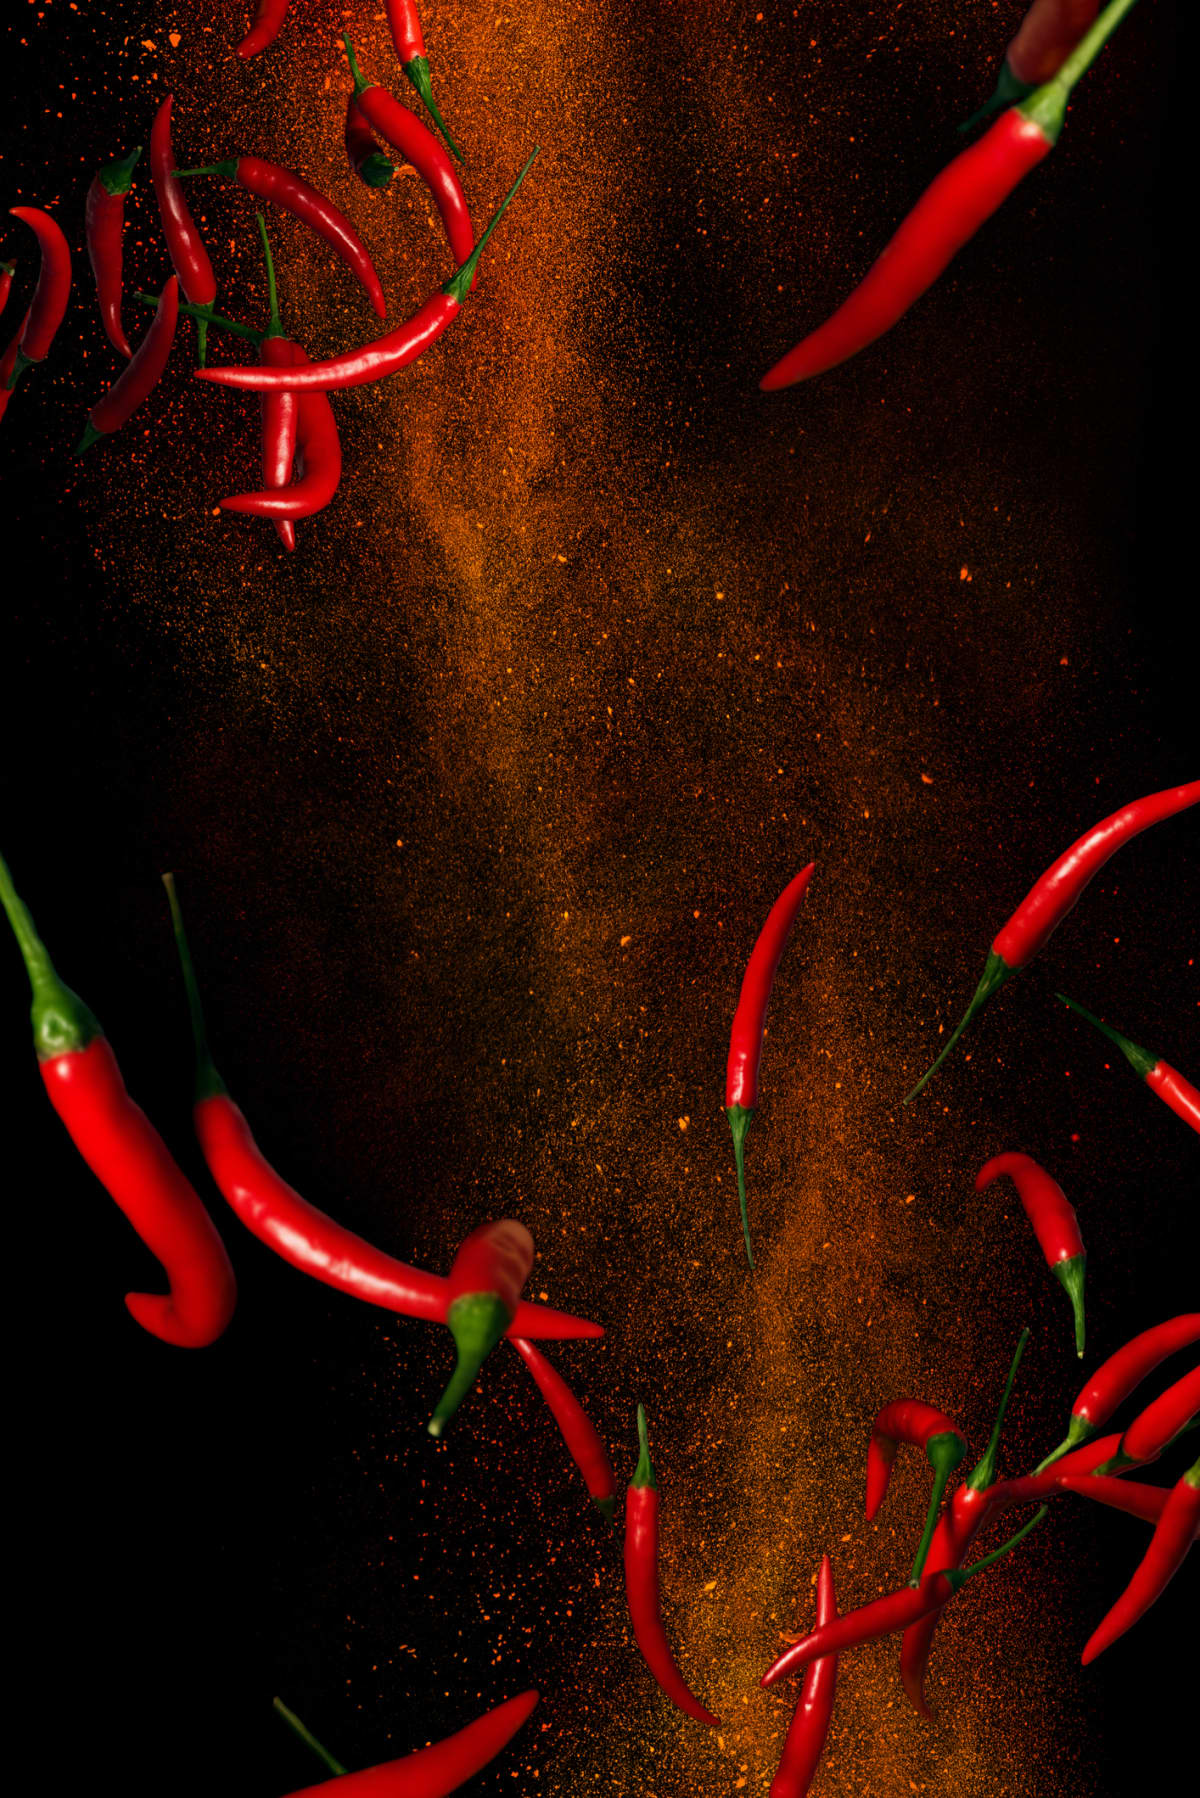 Hot red pepper flakes in flight. Plenty of fresh fruit along with the dry ground powder. Dynamic conceptual photography on a black background